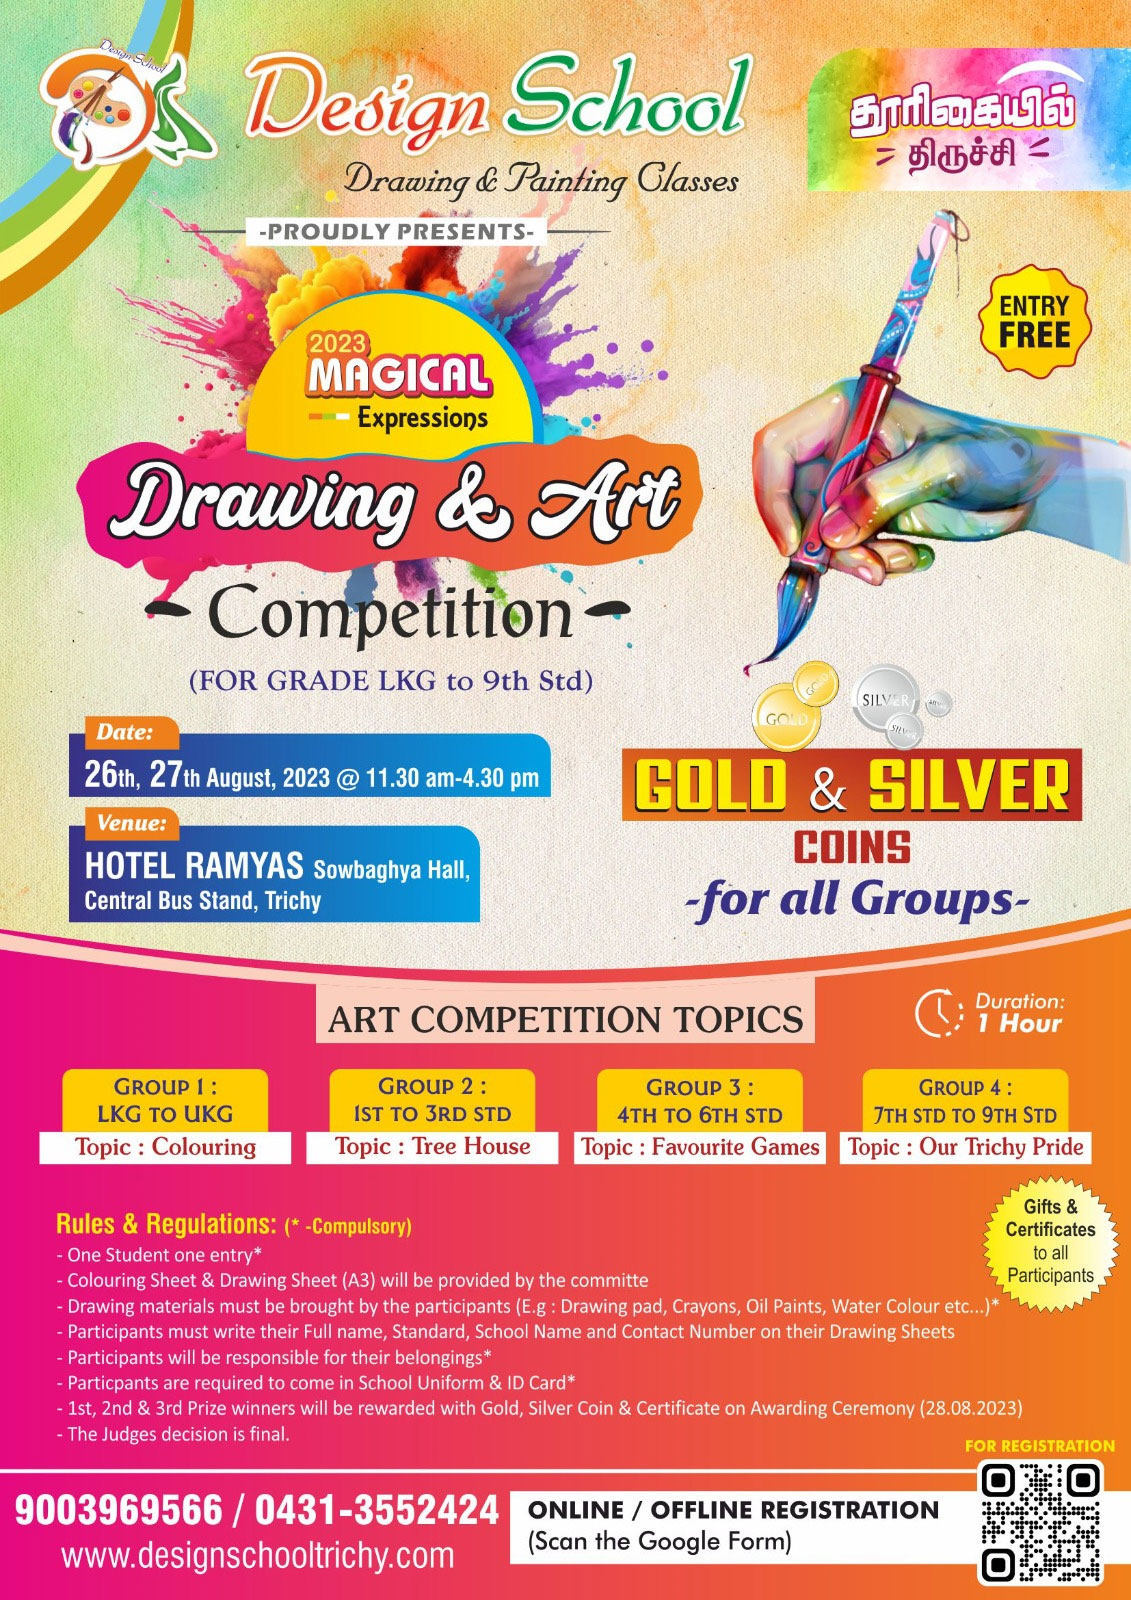 Drawing & Art Competition | Design School - School of Arts Trichy